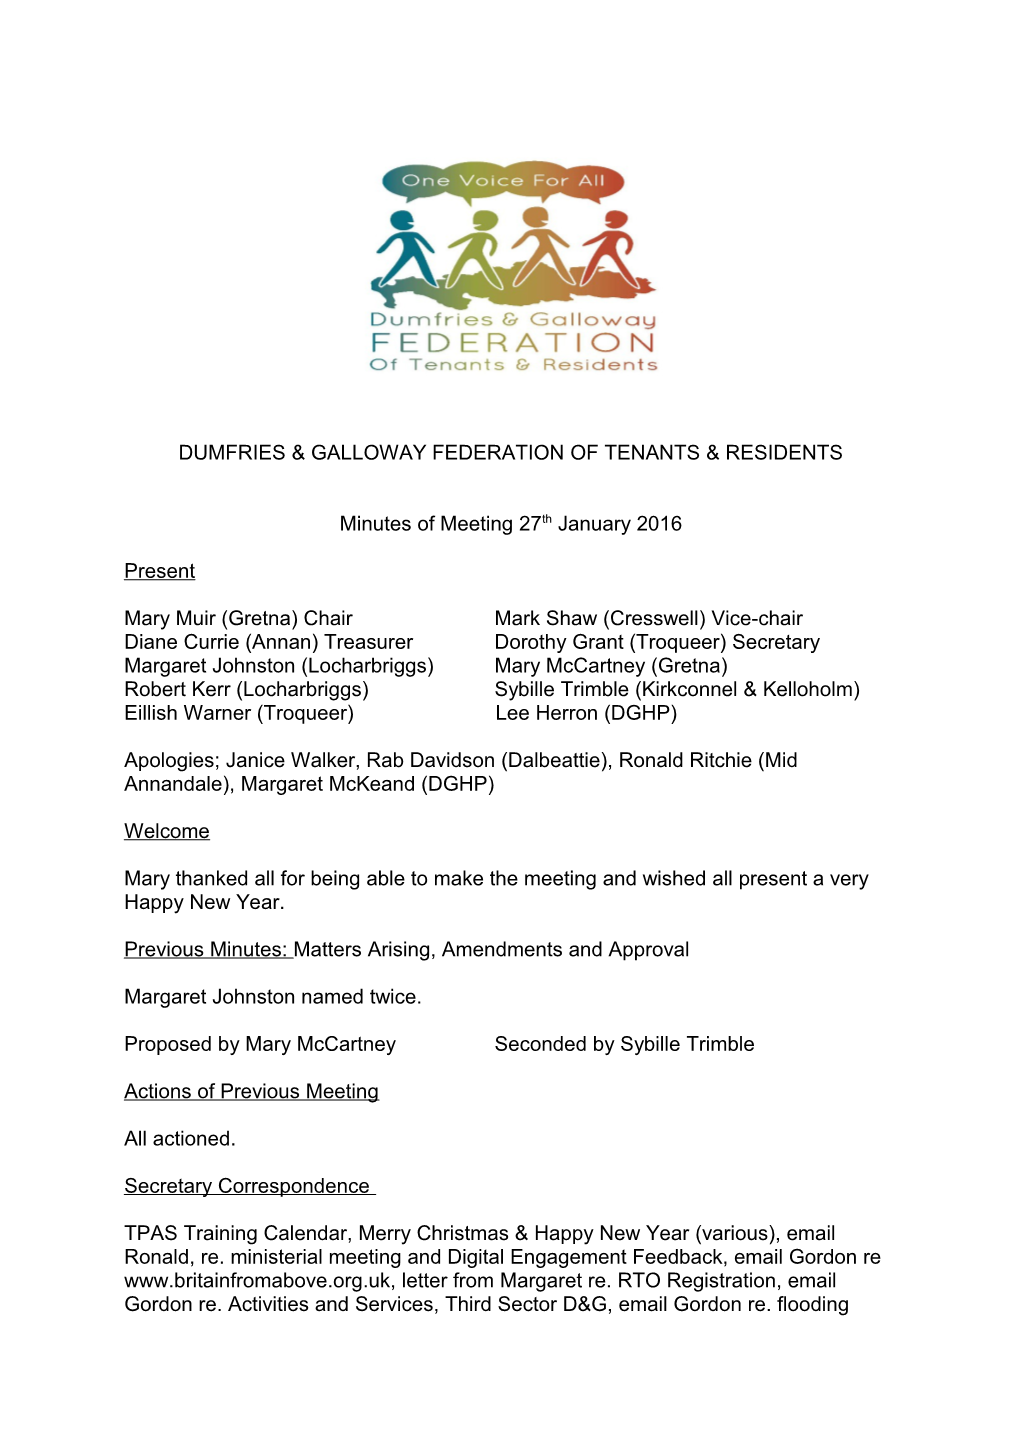 Dumfries & Galloway Federation of Tenants & Residents